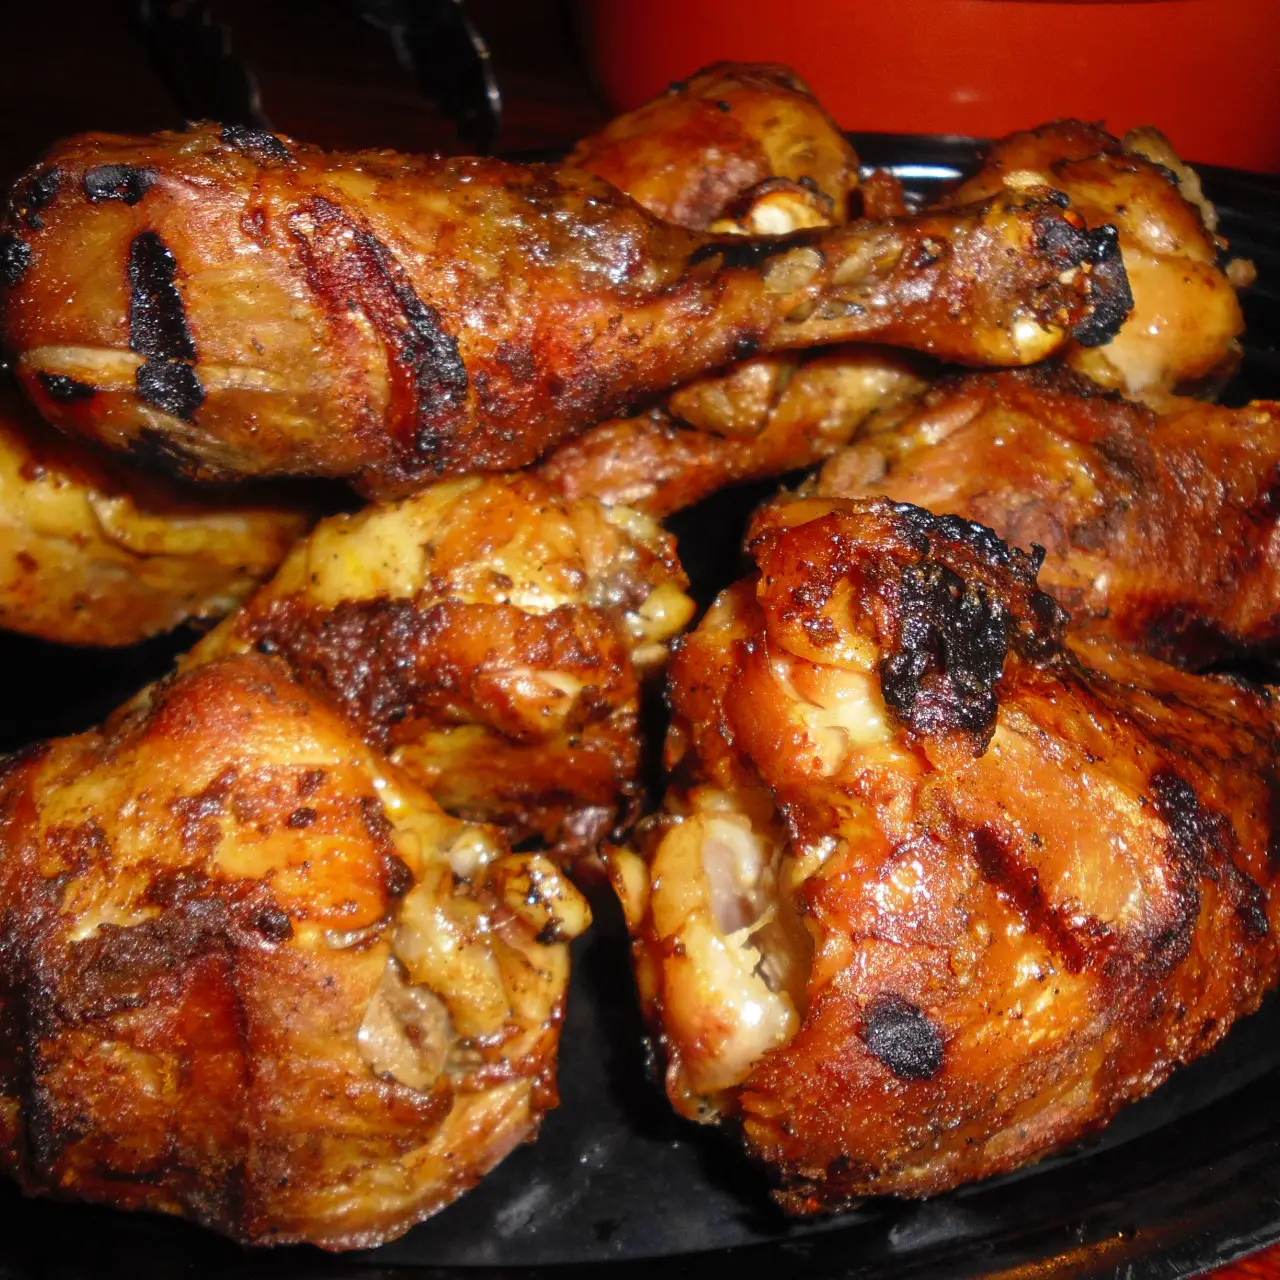 Lemon and Black Pepper Marinated Grilled Chicken Legs